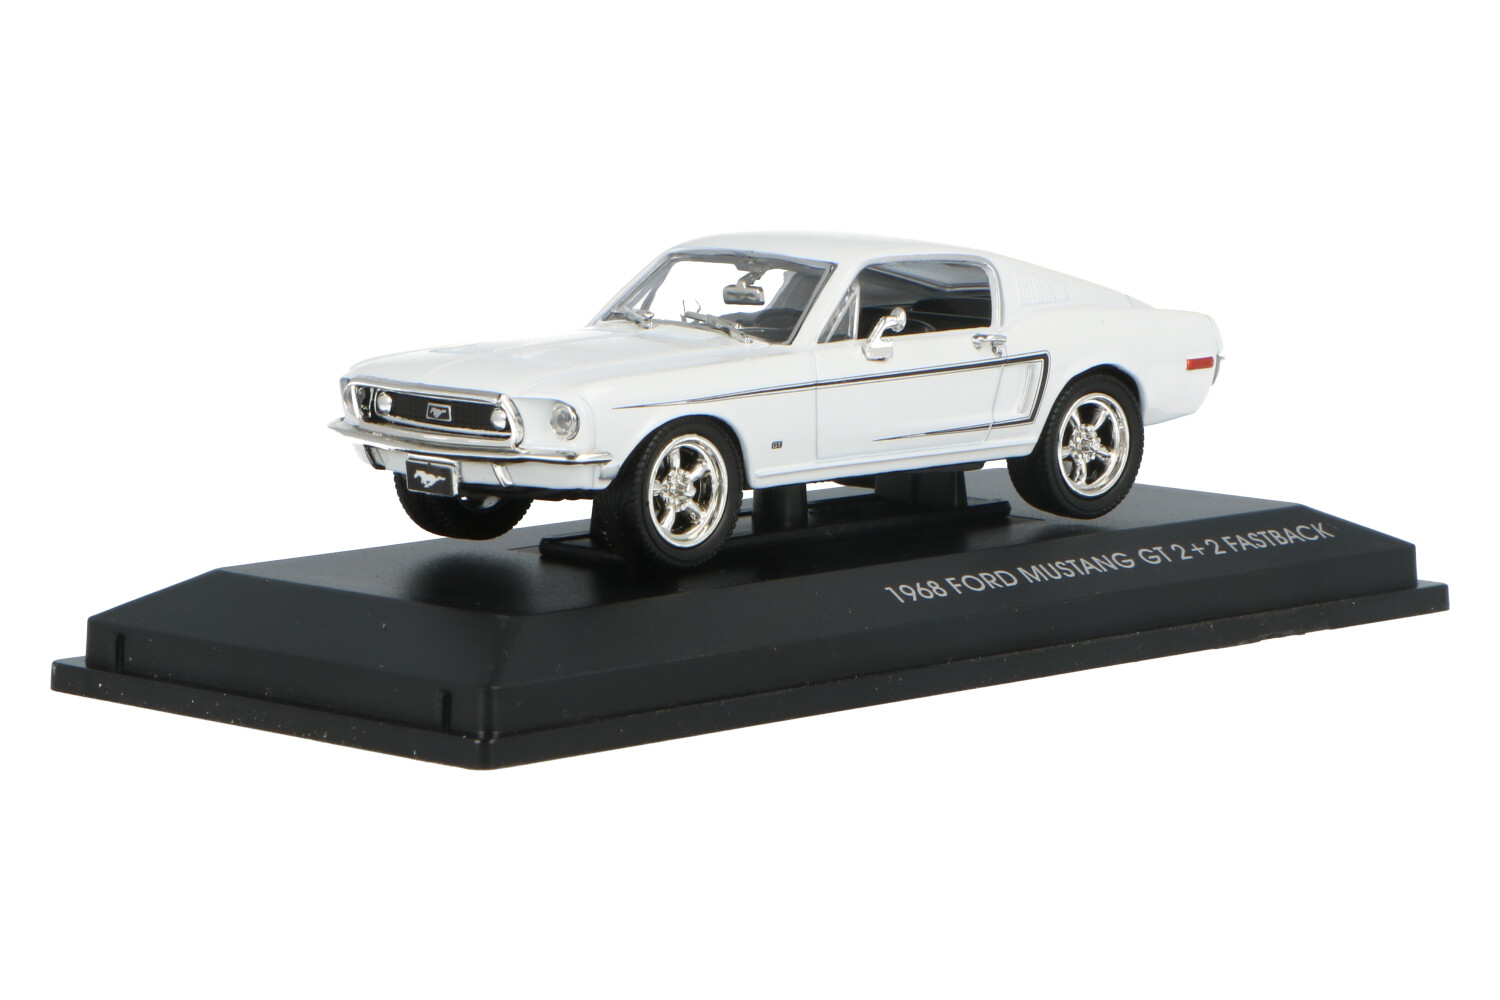 Ford-Mustang-43206_1315888693432069Ford-Mustang-43206_Houseofmodelcars_.jpg